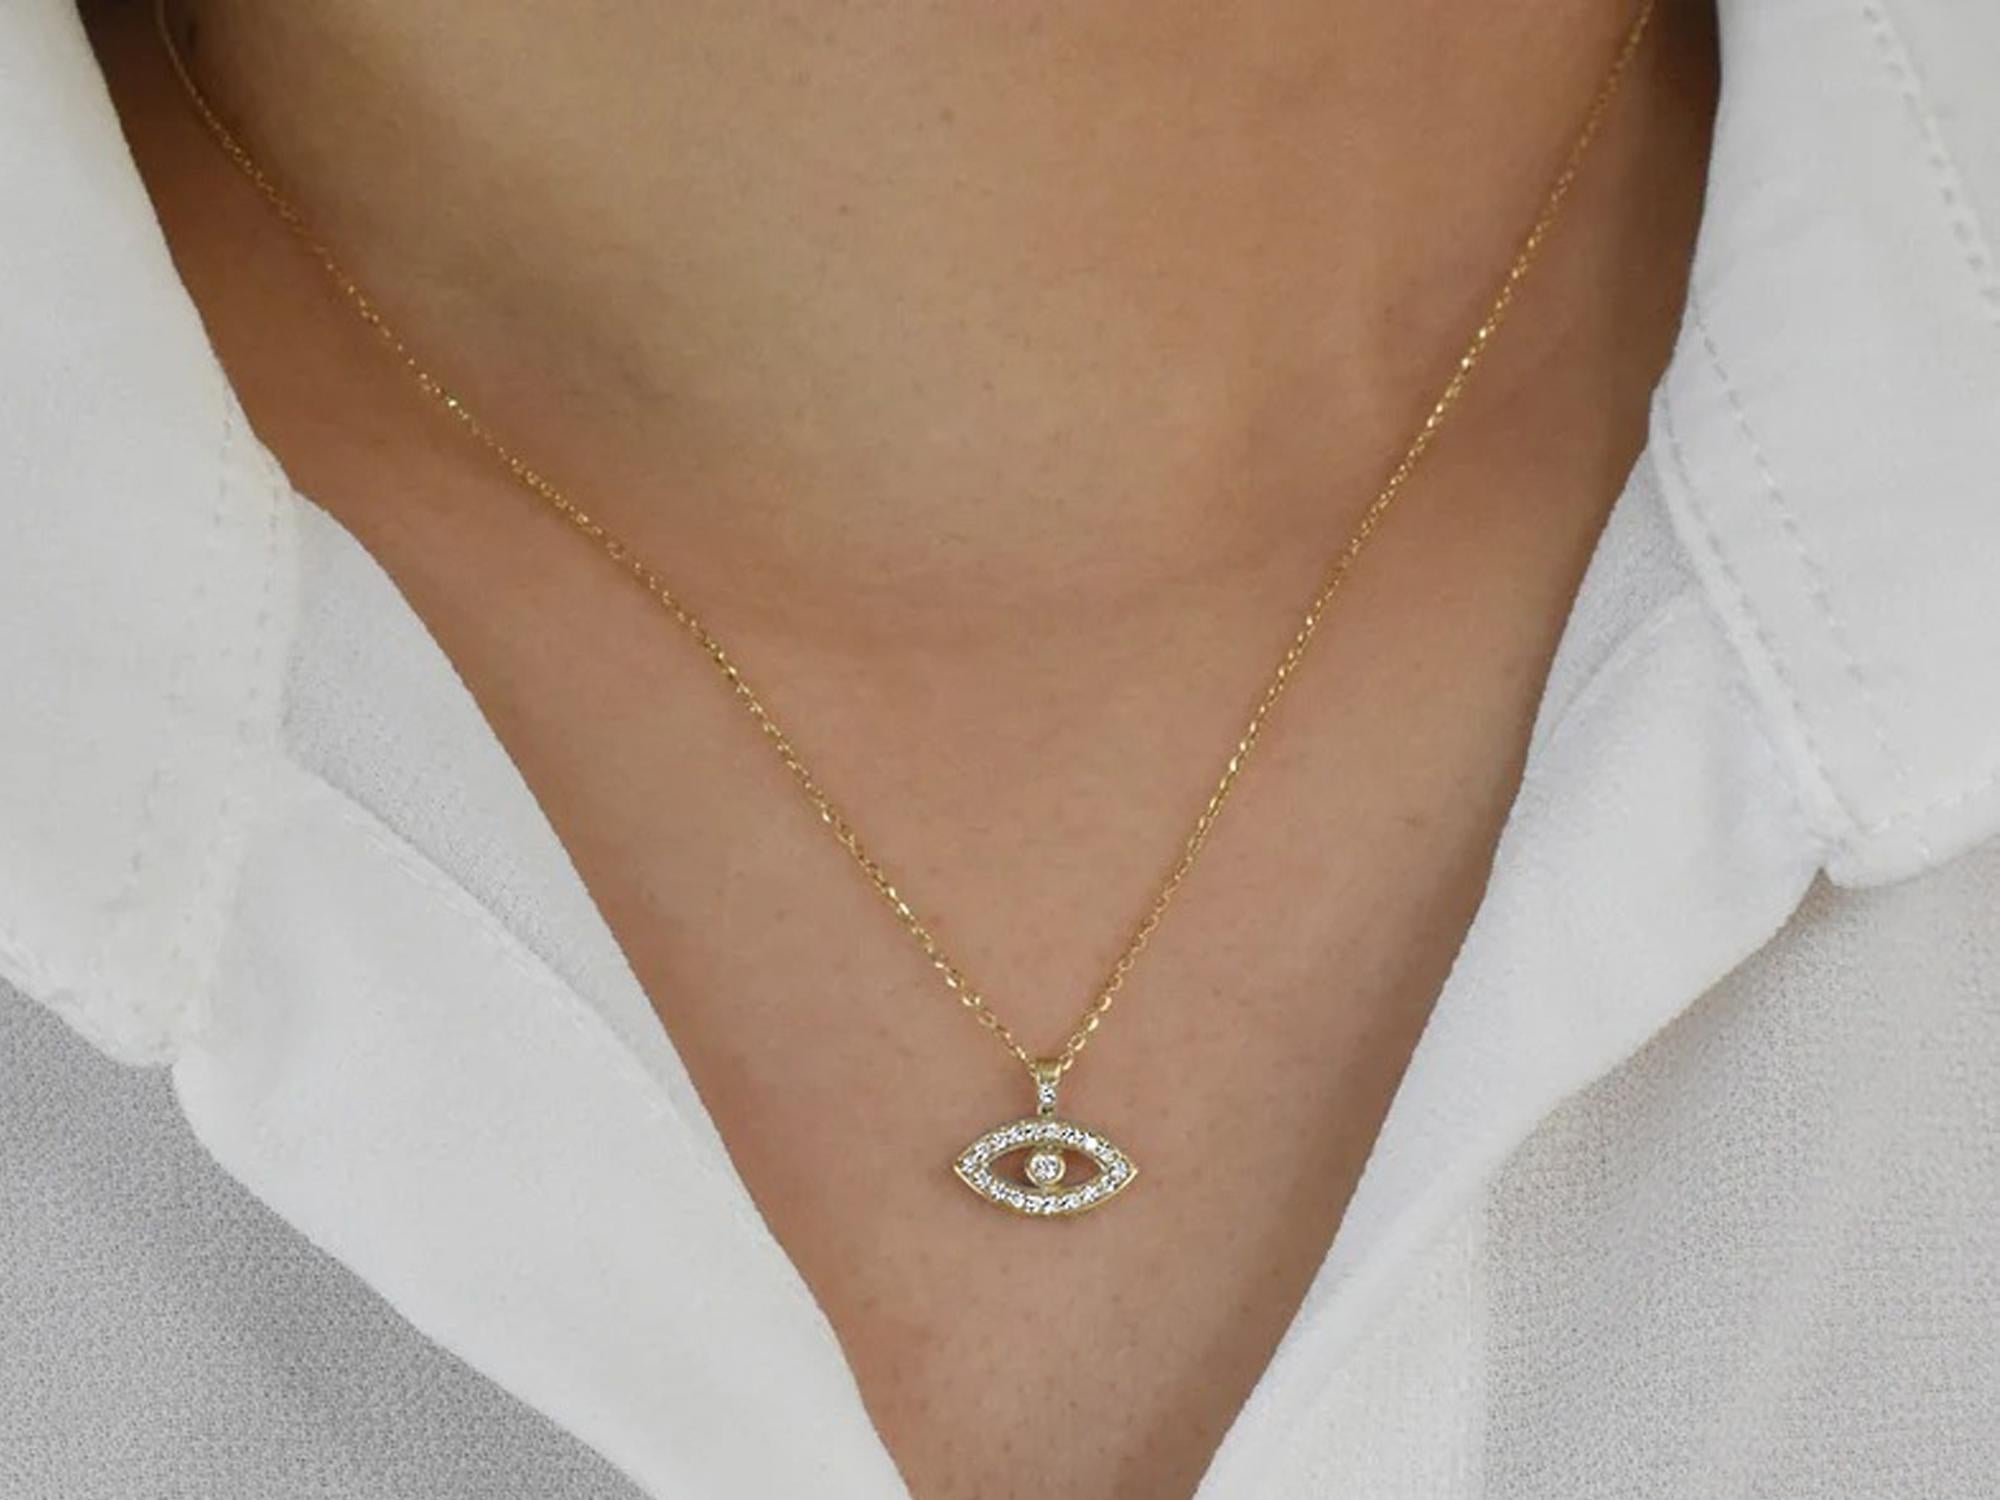 The beautiful little Evil Eye pendant is made from 18k solid gold adorned with natural white round cut diamonds. This necklace is designed to protect the wearer from the negativity and evil around. Perfect for wearing by itself for a minimal